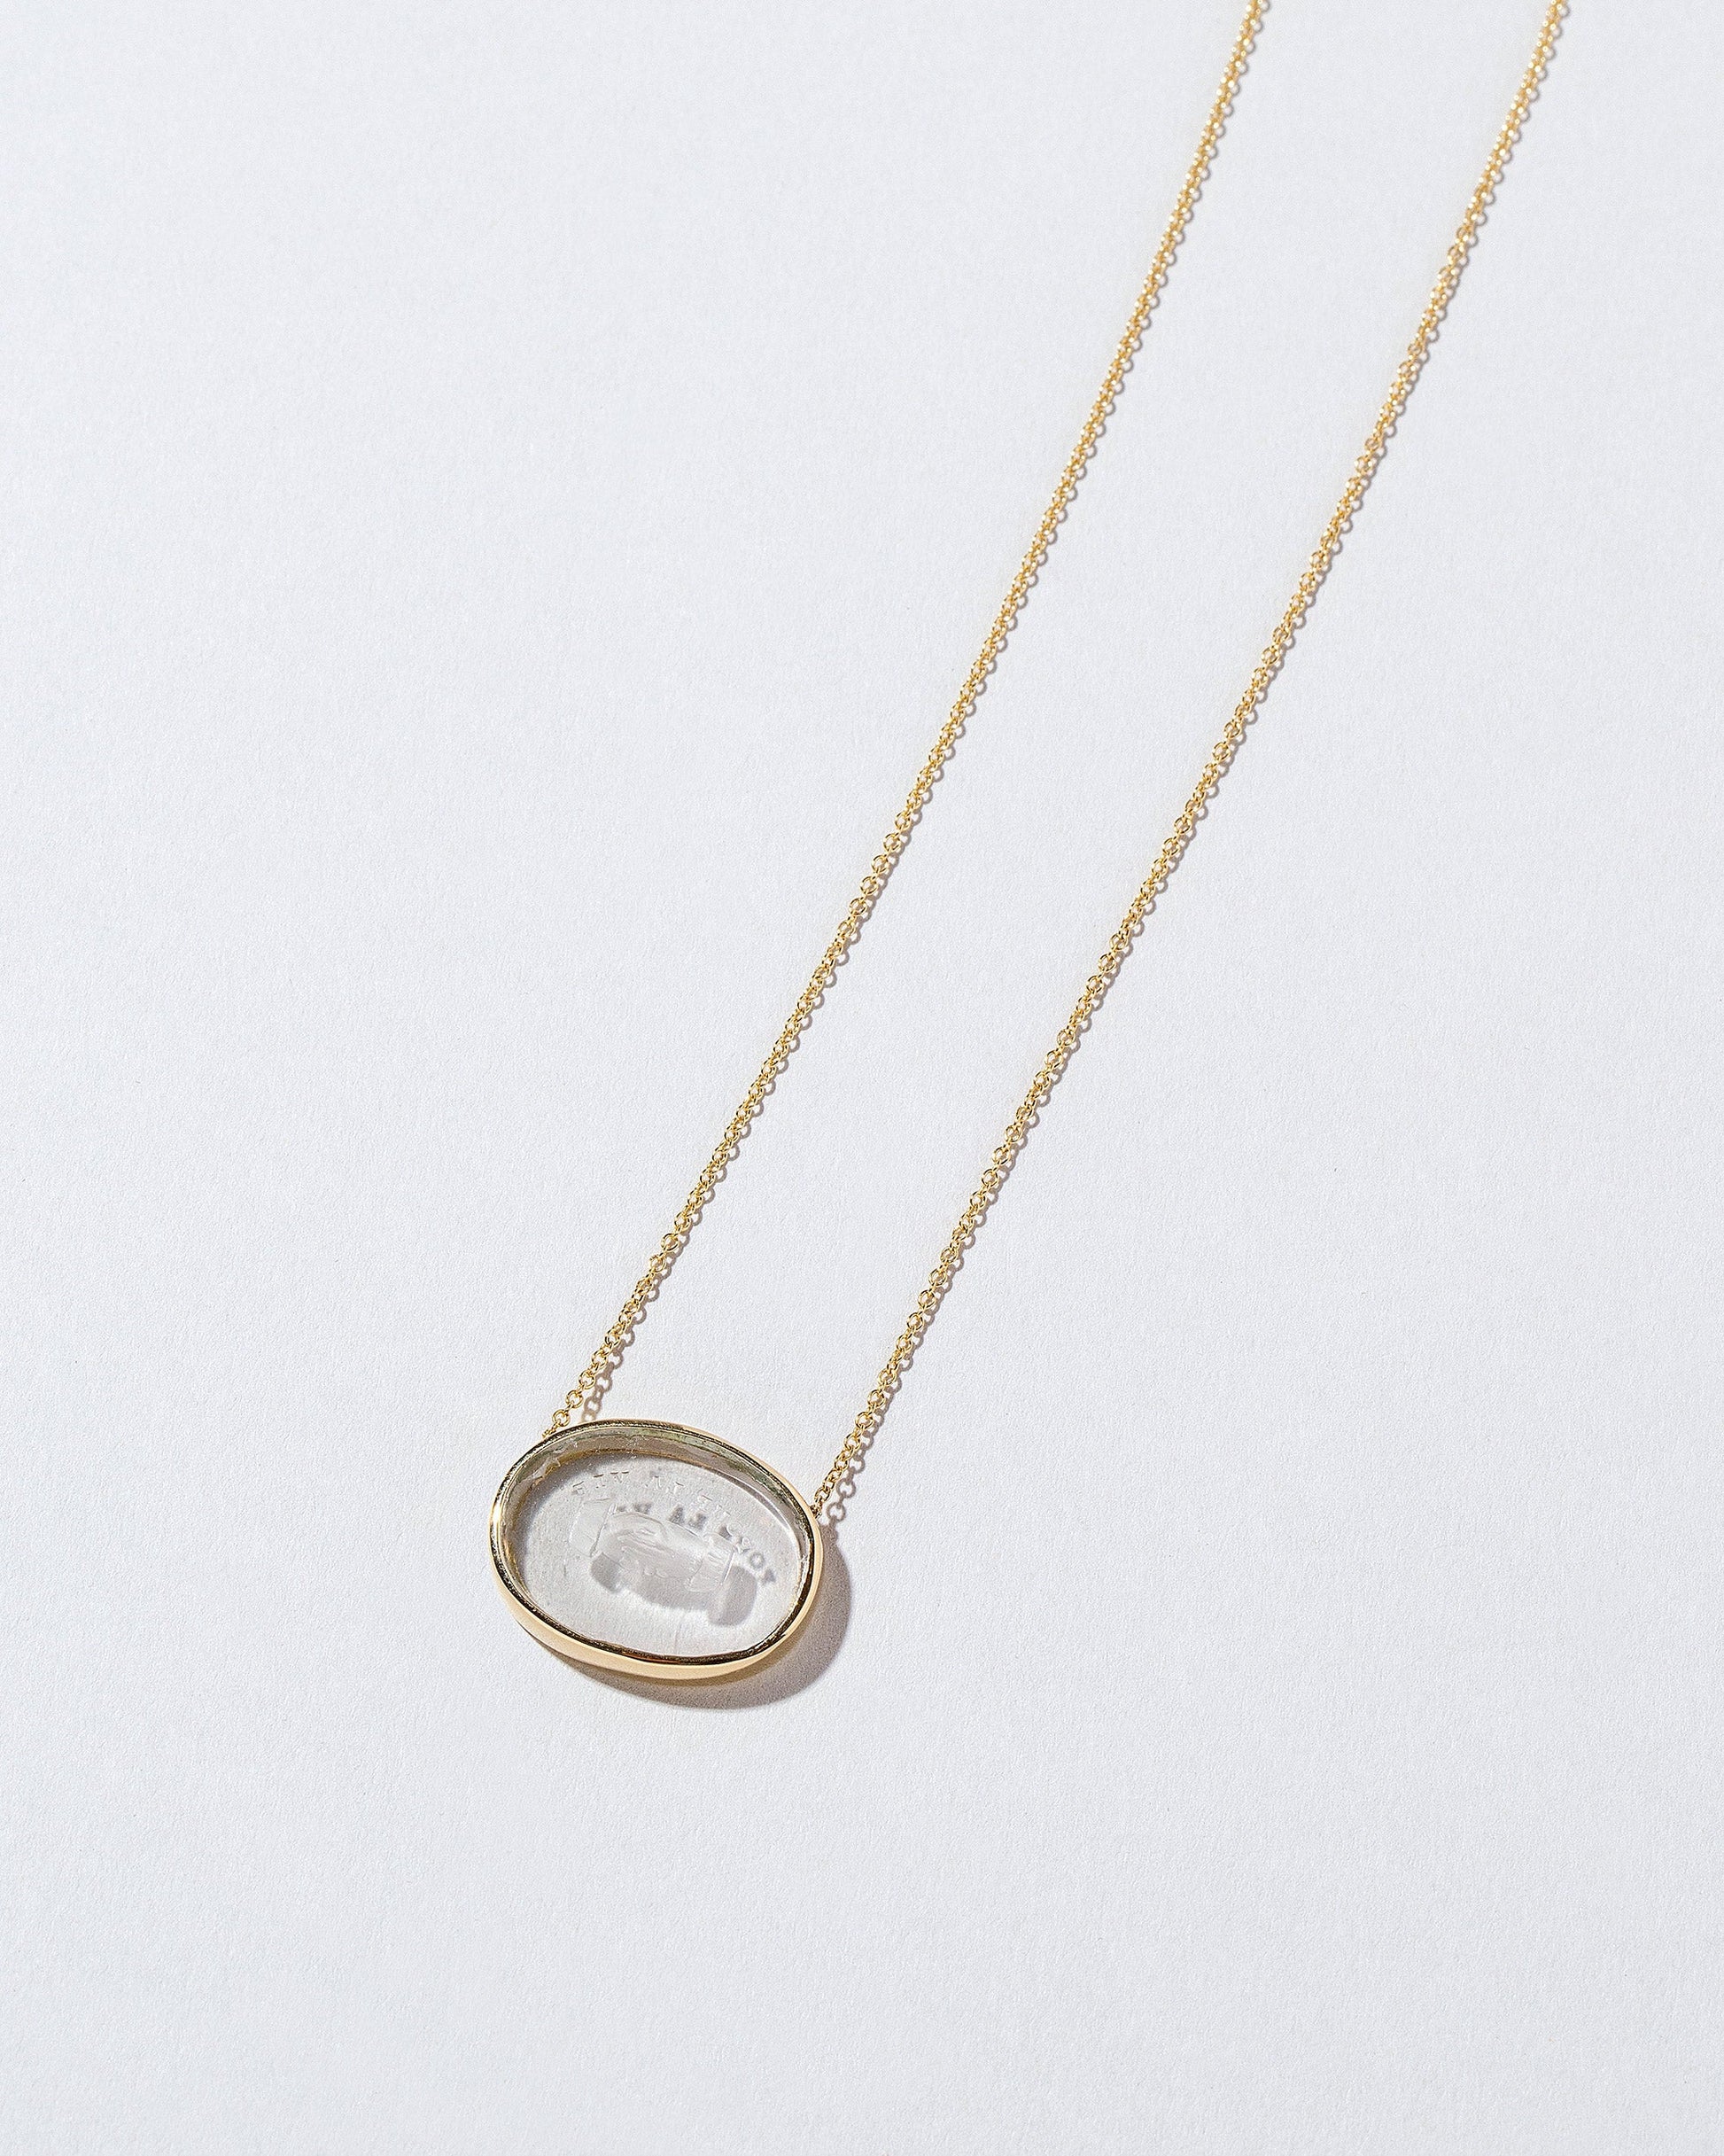  Eternity Intaglio Seal Necklace on light color background.